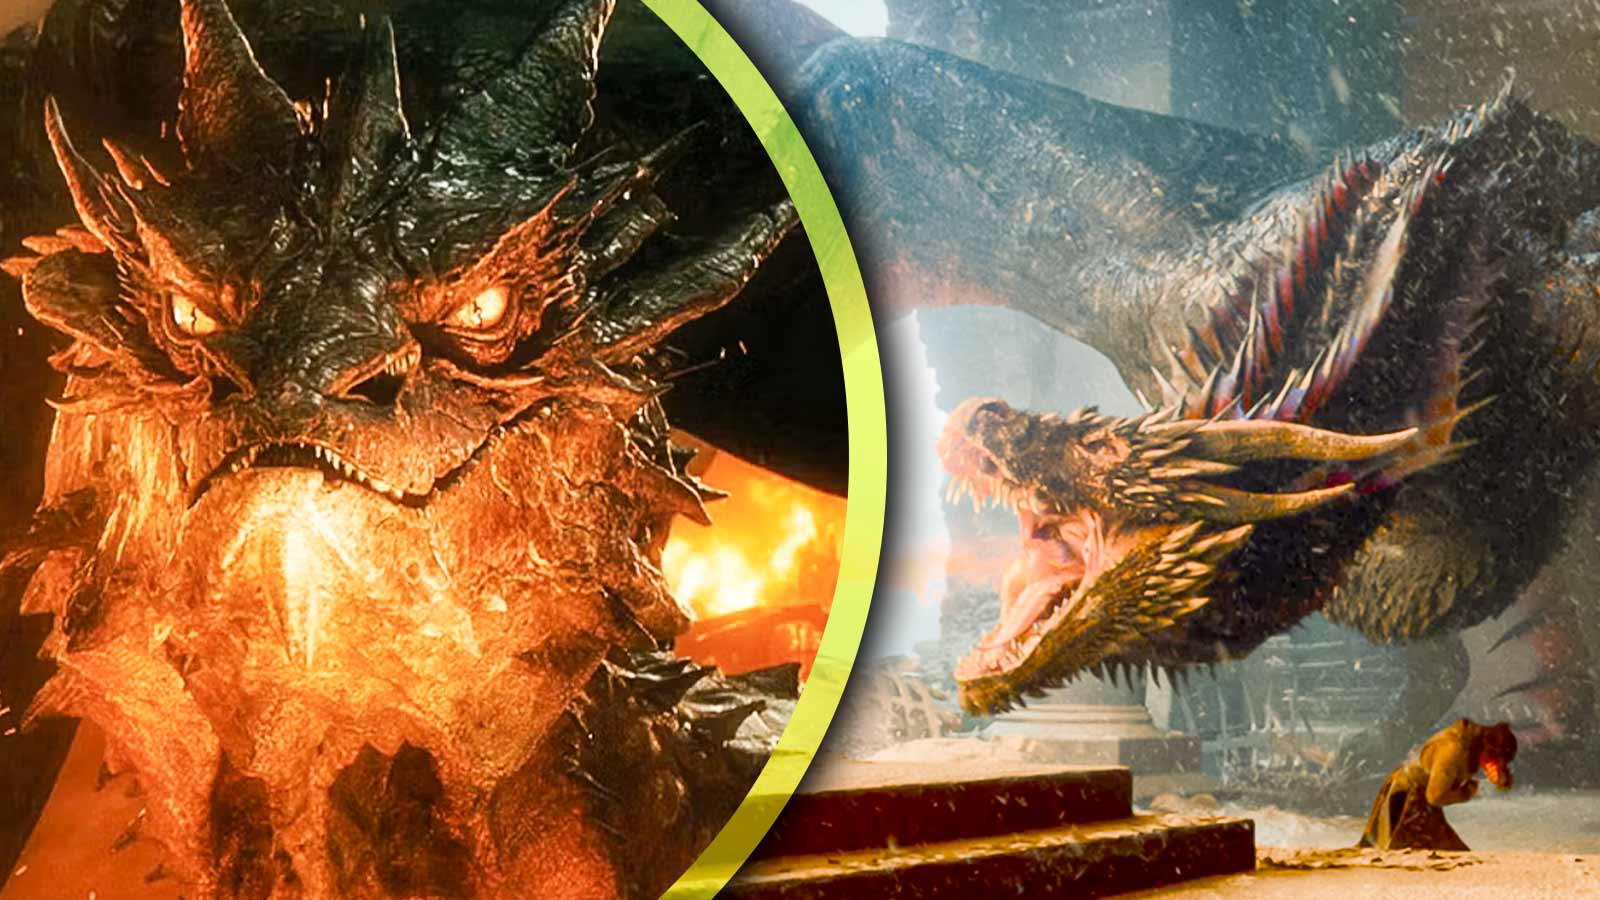 Drogon v Smaug: George R. R. Martin Feels Intimidated By J. R. R. Tolkien’s Creation Due to an “Intellectual Advantage” That Smaug Has Over Drogon